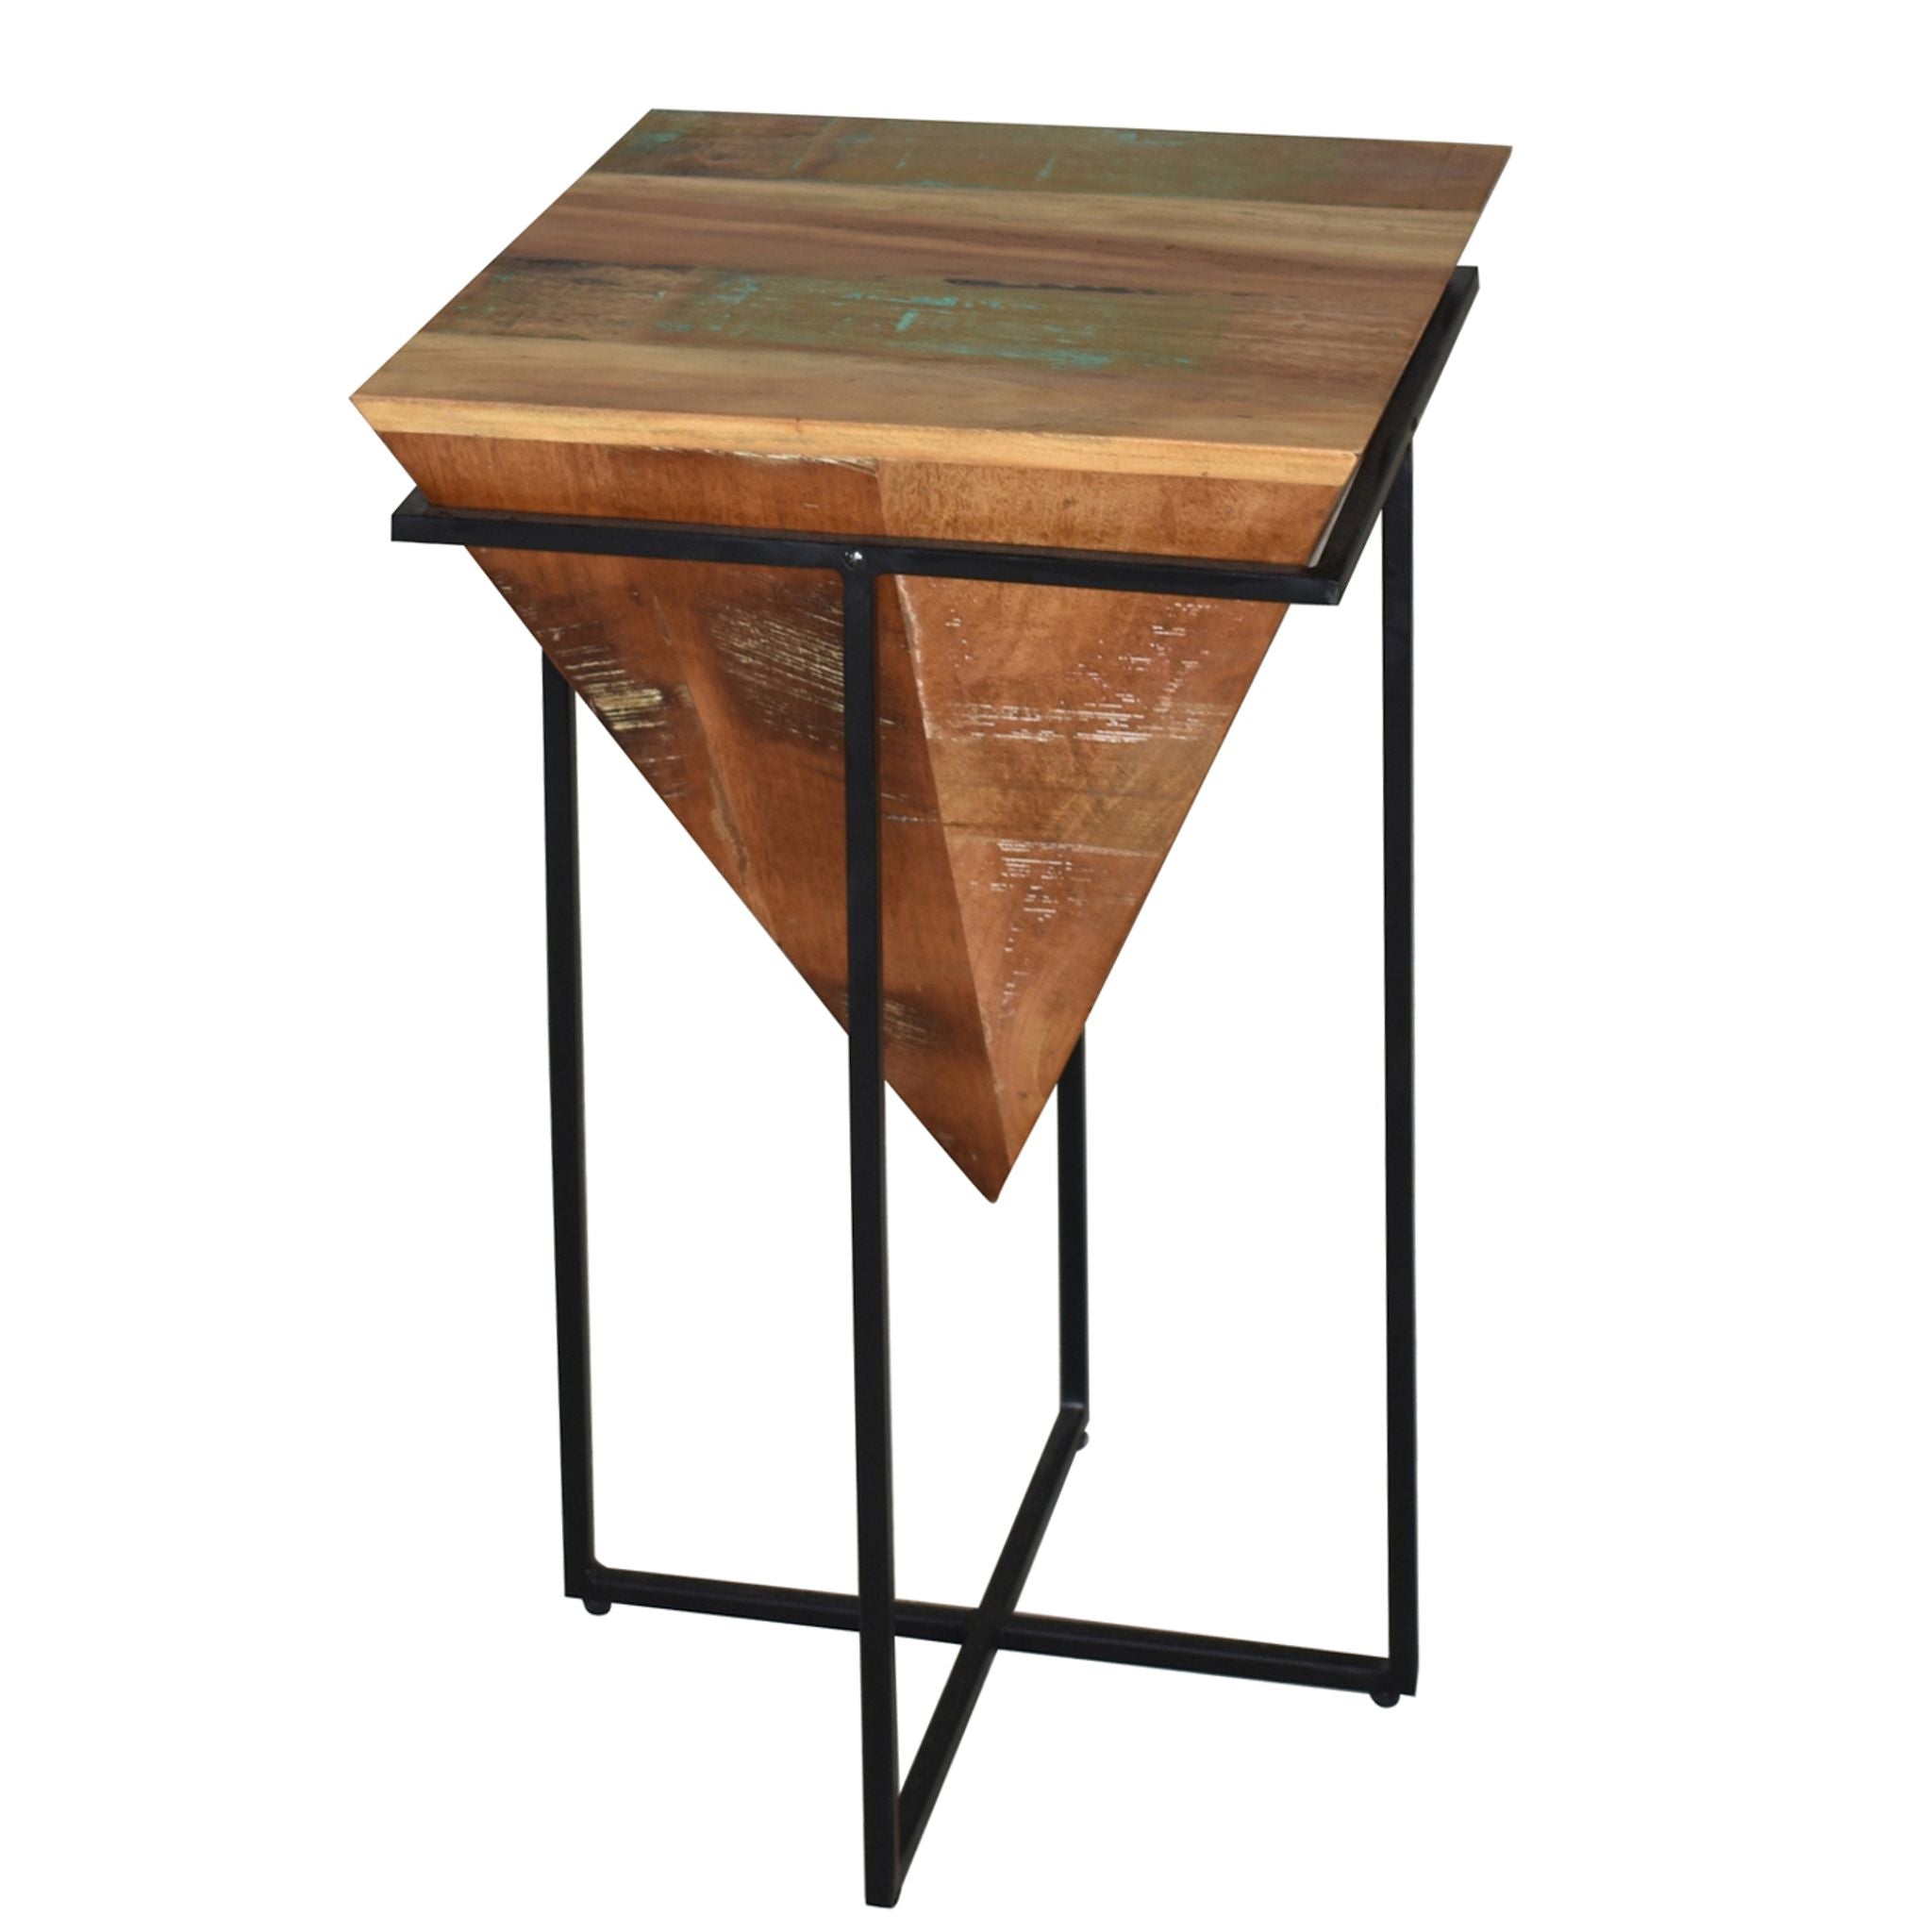 Bare Decor Compass Accent Table in Mango Wood with Metal Base, 16x16x24